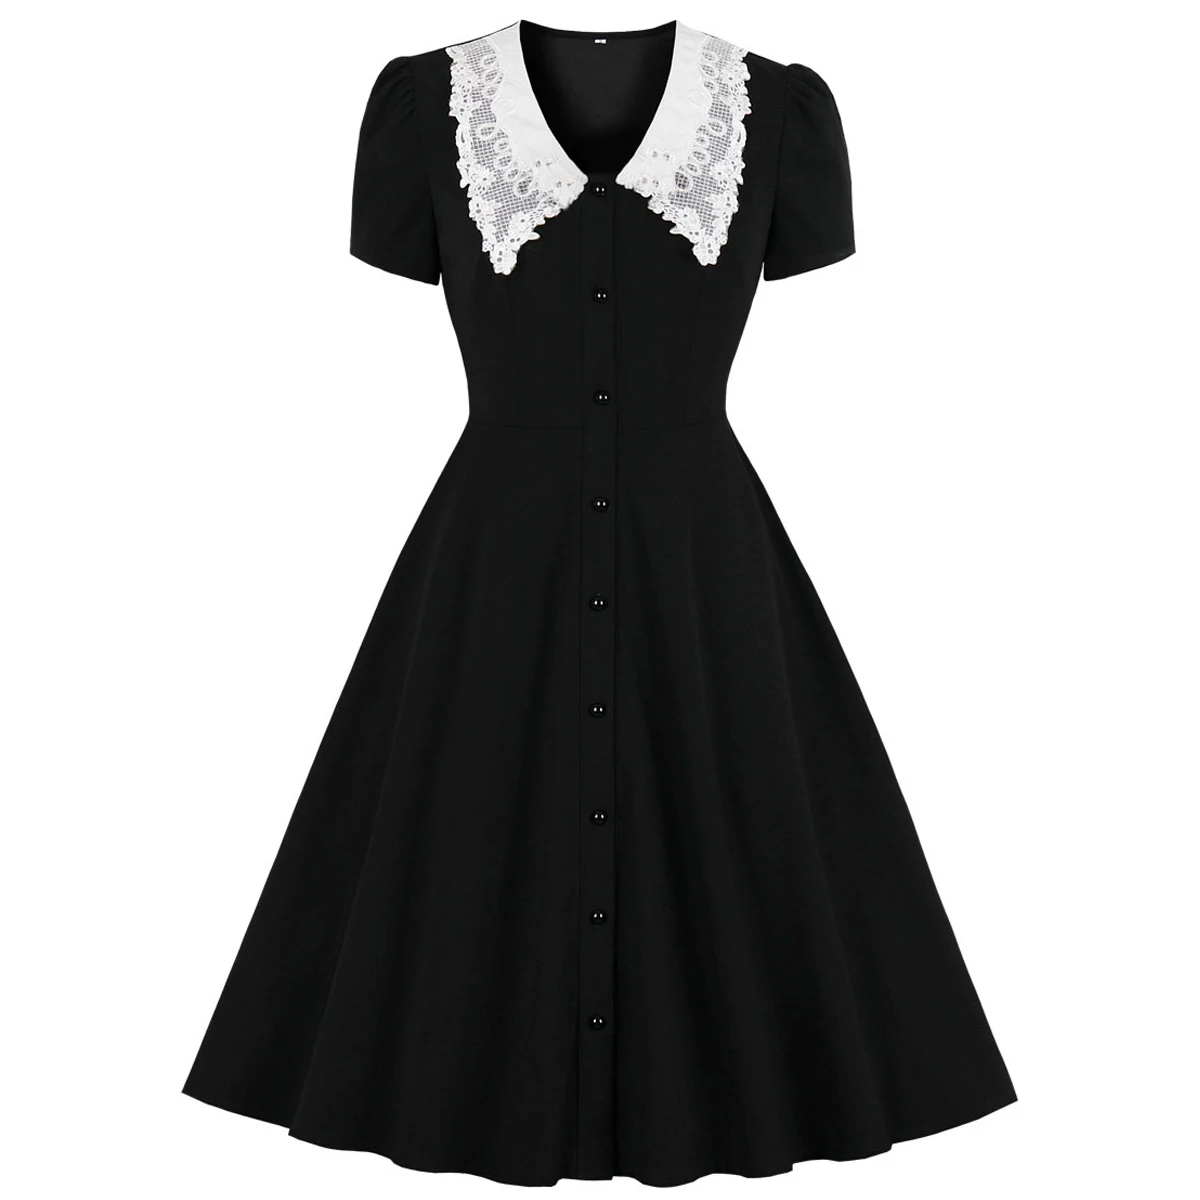 Black Summer Women Casual Swing A Line Cotton Dress Lace Peter Pan Collar Short Sleeve Pinup 50s 60s Vintage Rockabilly Dresses